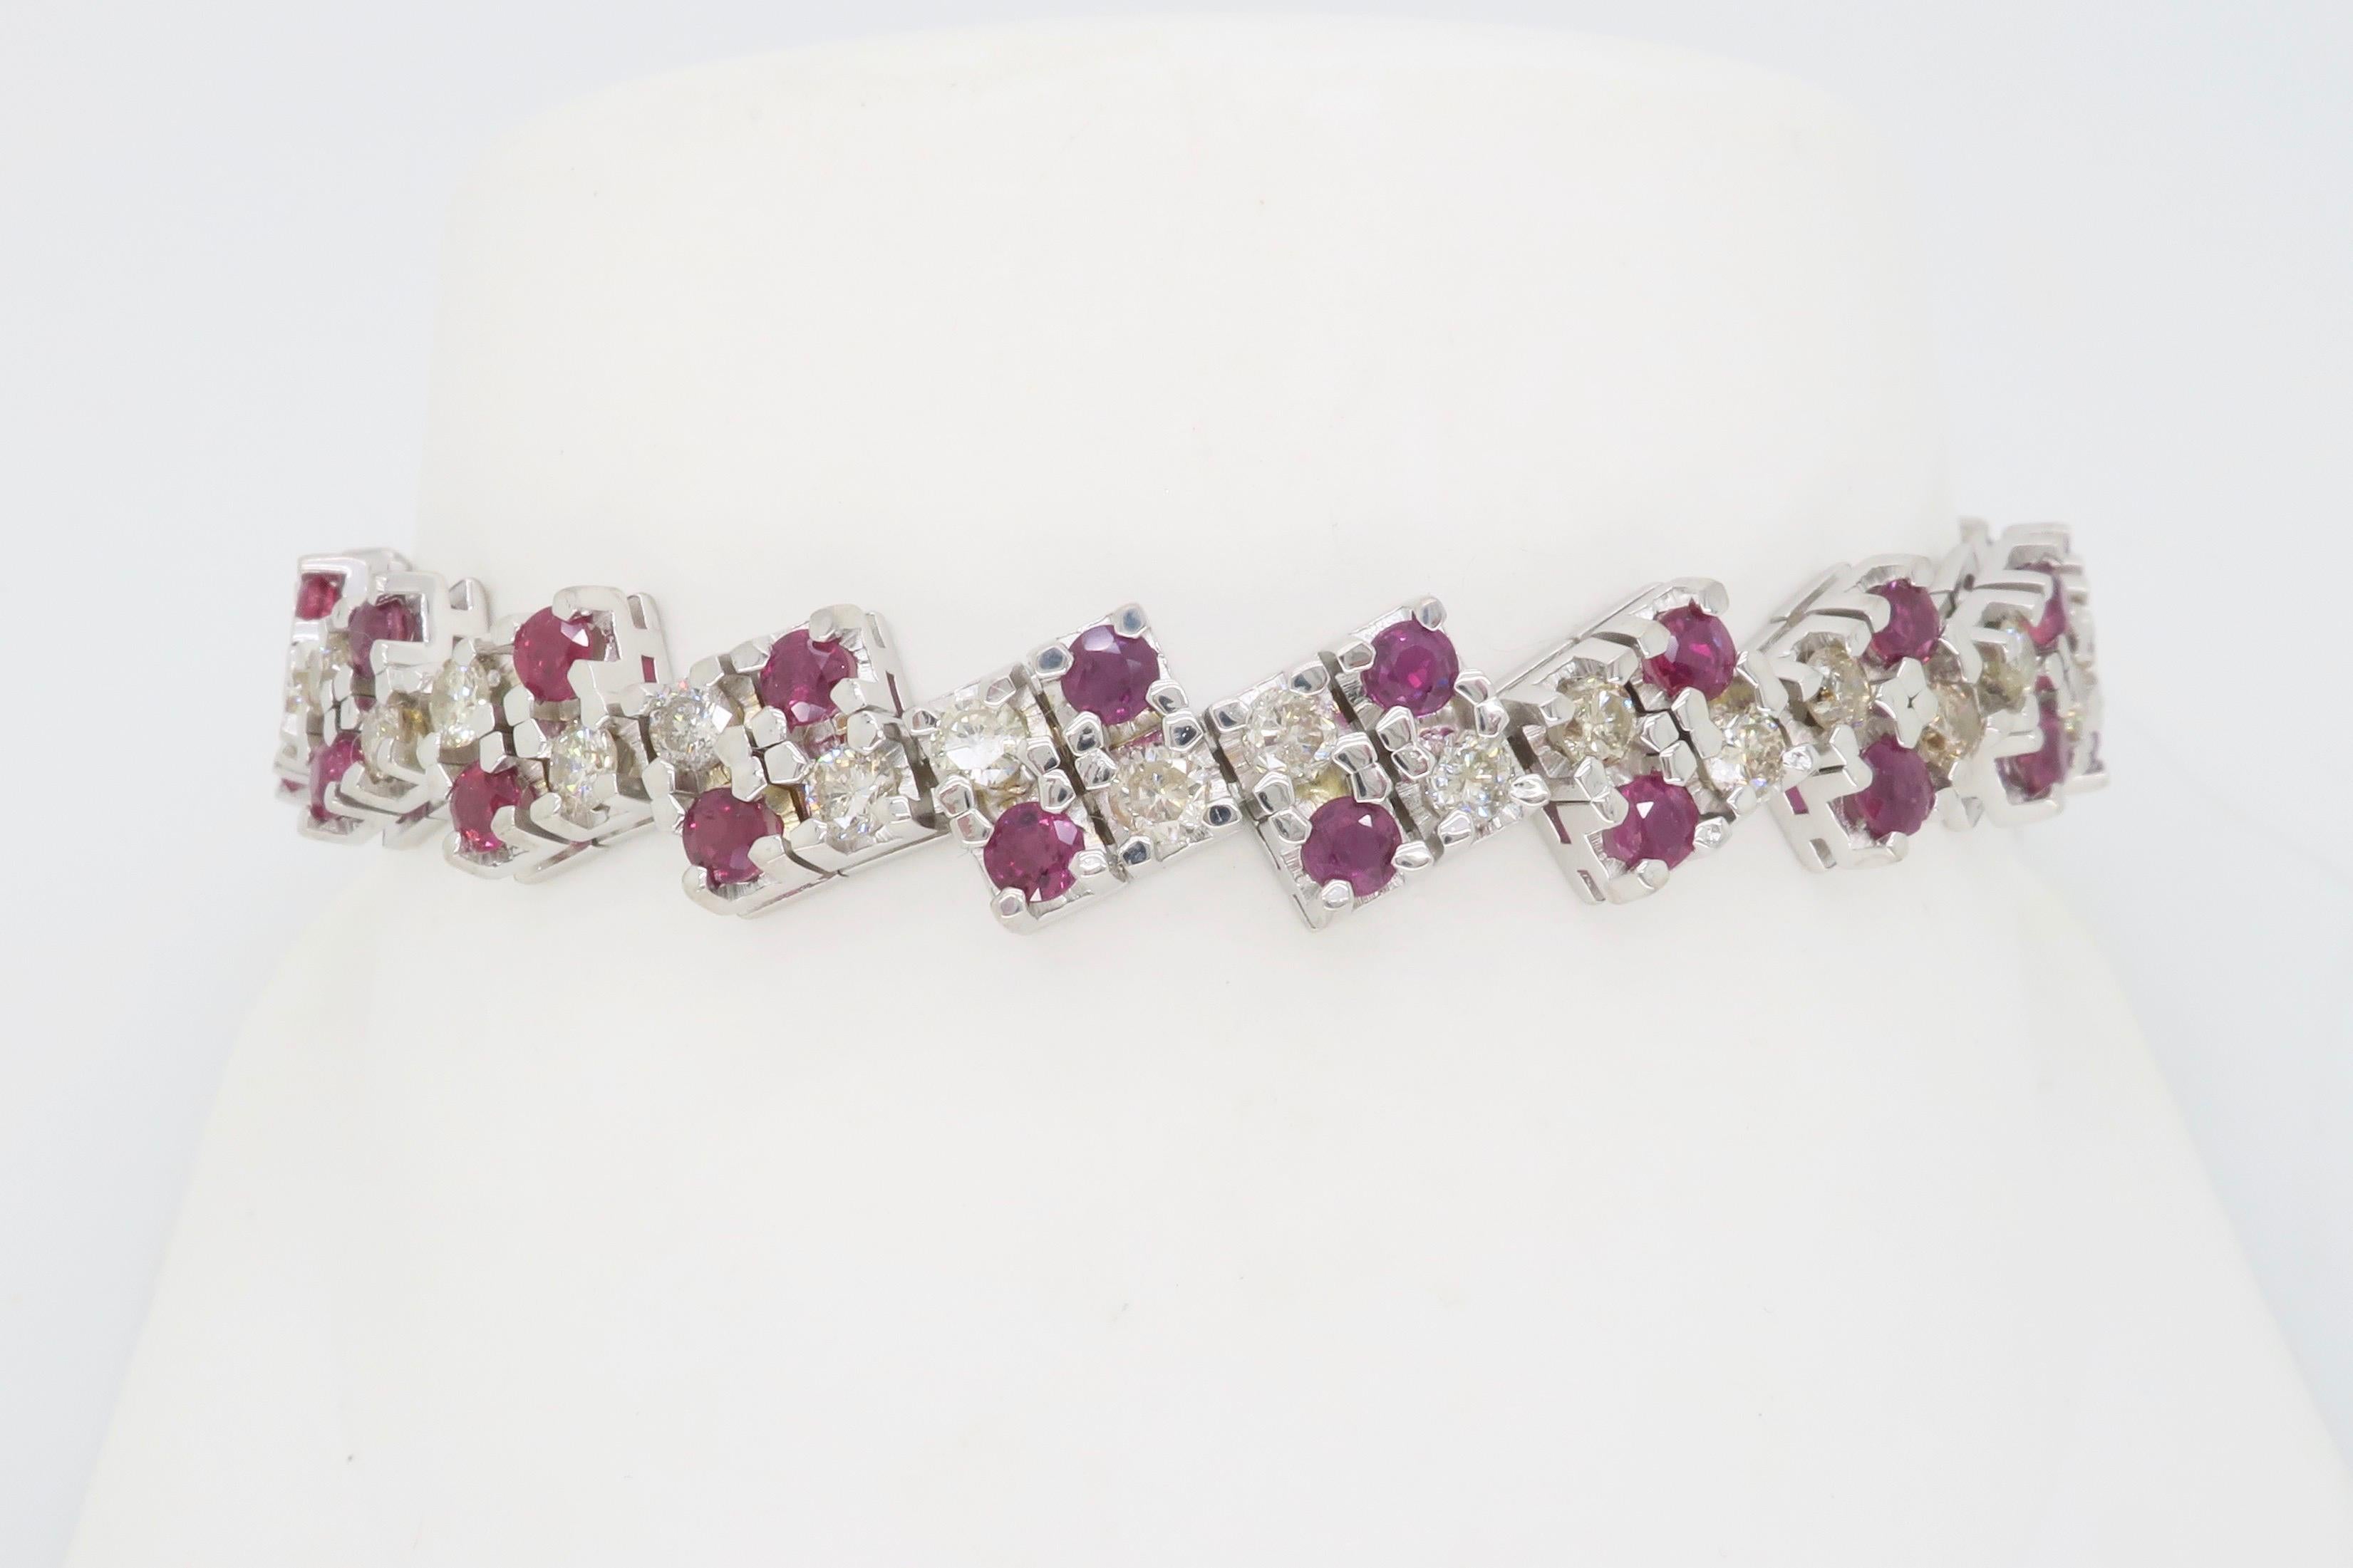 Unique ruby and diamond bracelet crafted in 14k white gold. 

Gemstone: Diamond and Ruby
Gemstone Weight: 41 Rubies measuring approximately 3mm each
Diamond Carat Weight: Approximately 3.25CTW
Diamond Cut: Round Brilliant Cut Diamonds
Color: Average